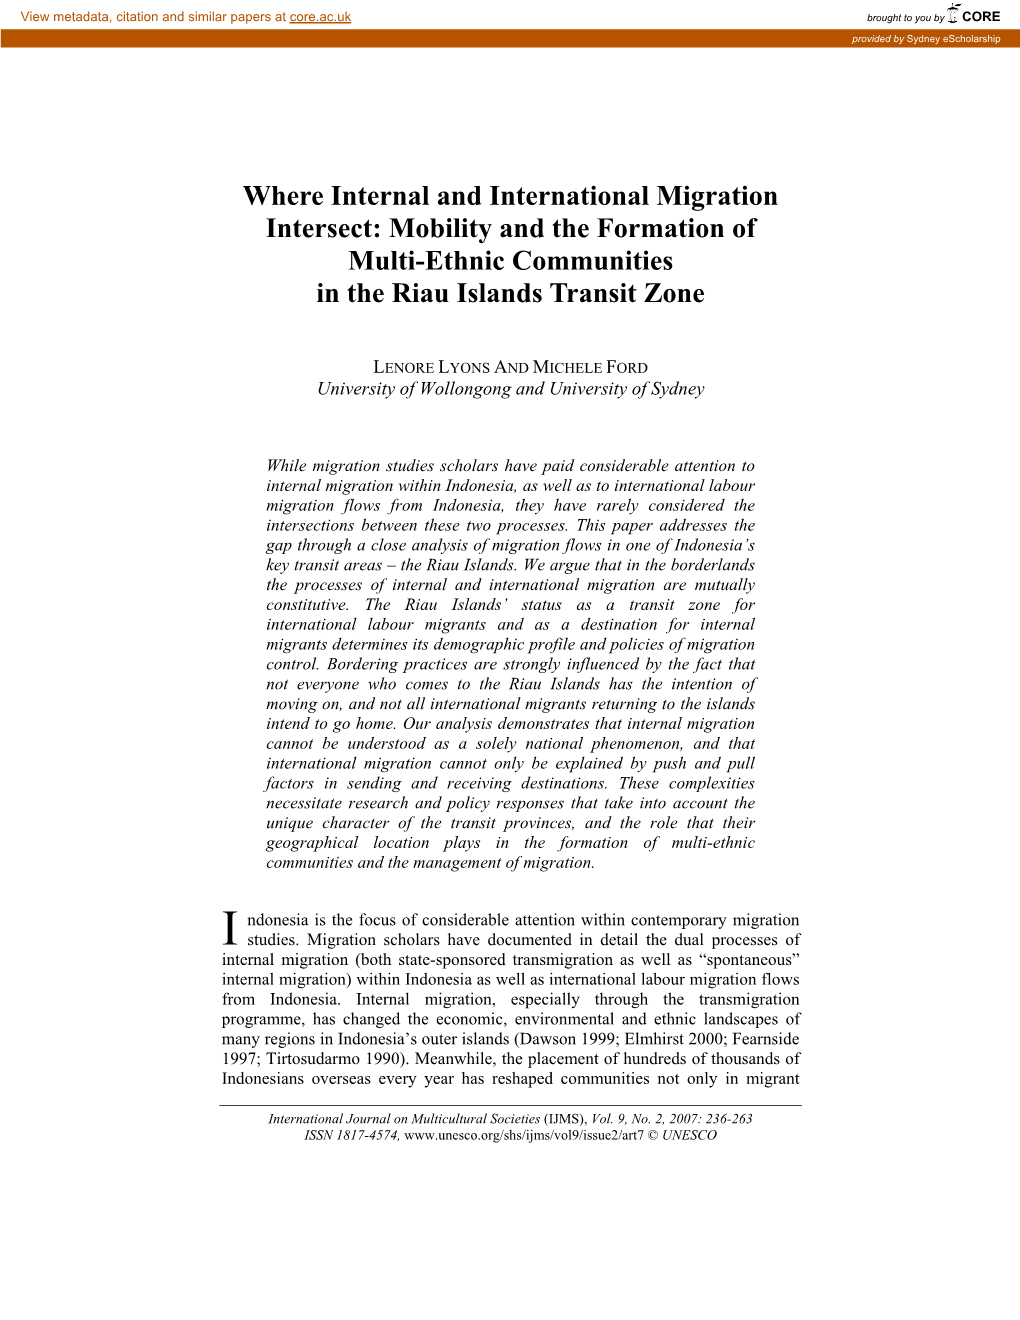 Where Internal and International Migration Intersect: Mobility and the Formation of Multi-Ethnic Communities in the Riau Islands Transit Zone